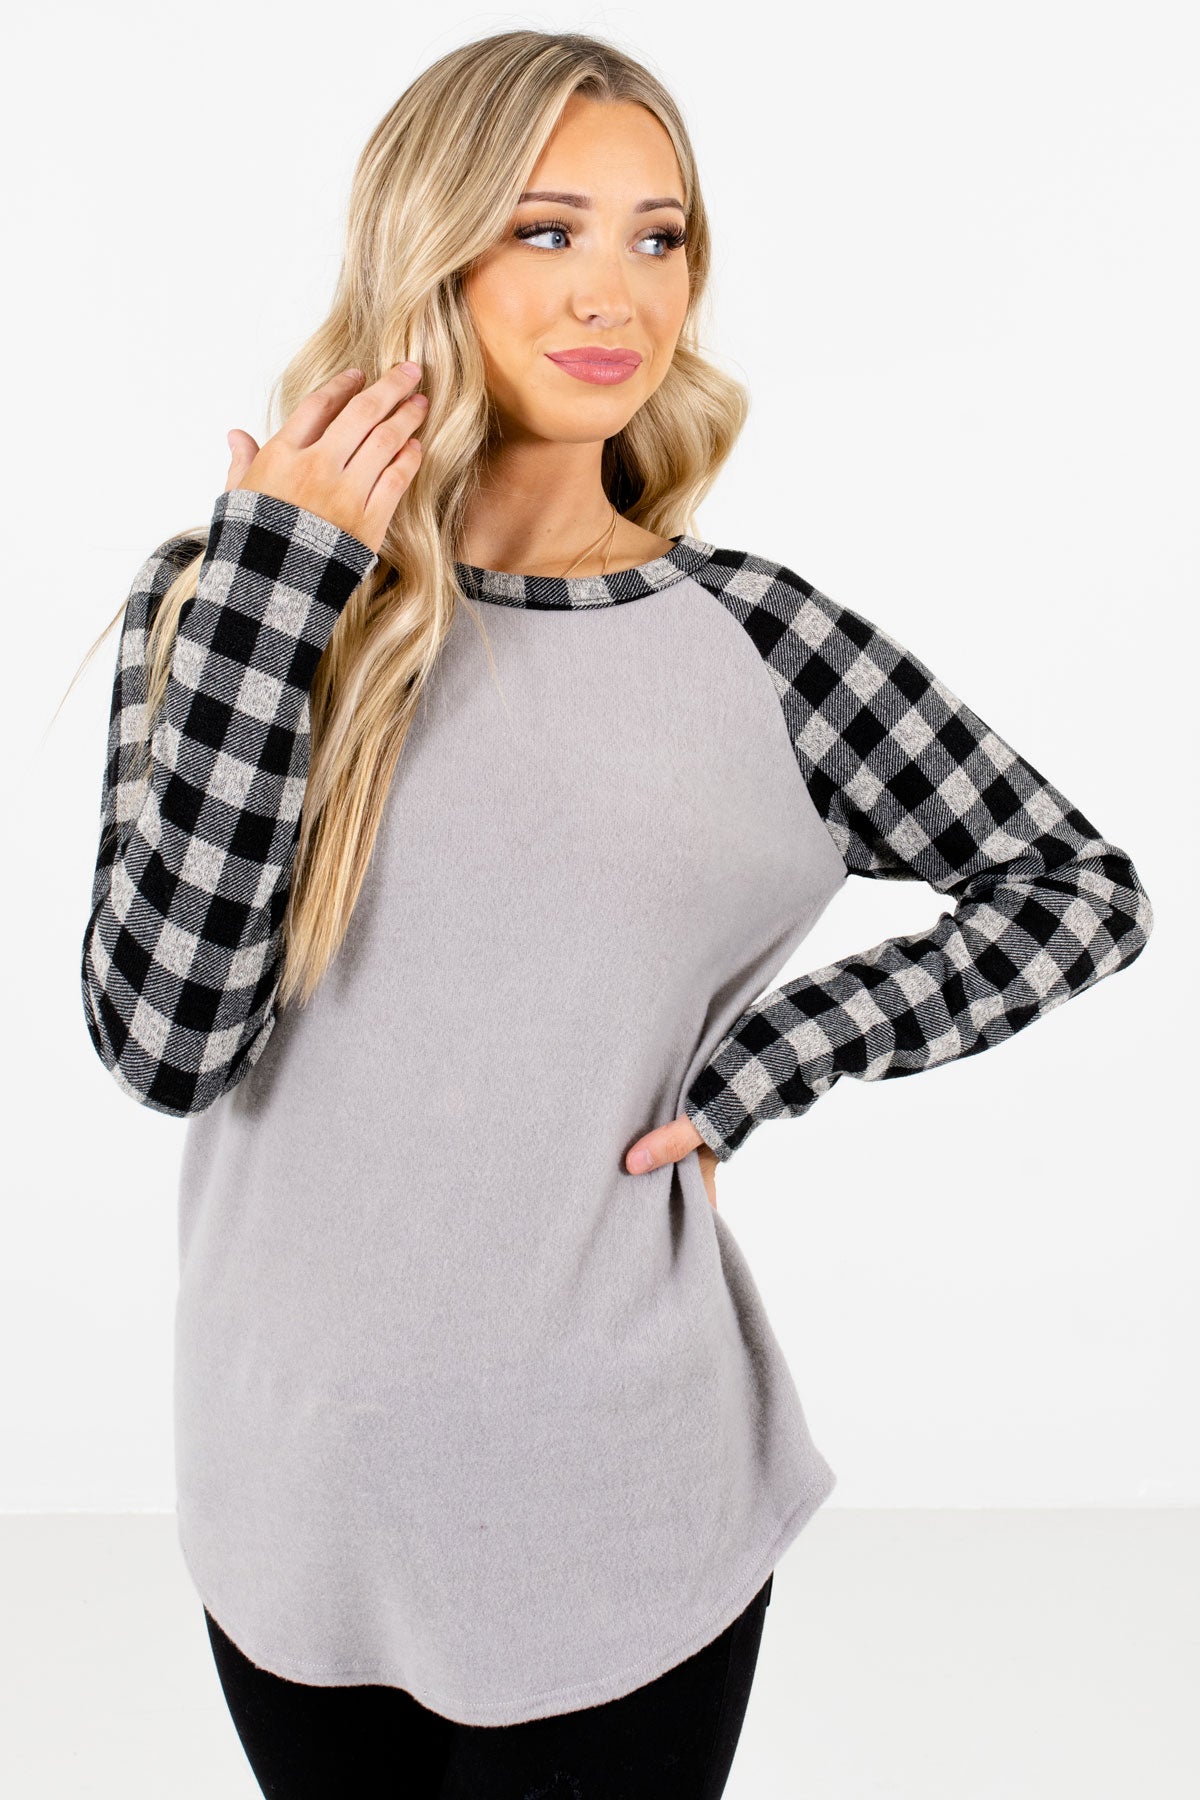 Women’s Black Warm and Cozy Boutique Tops